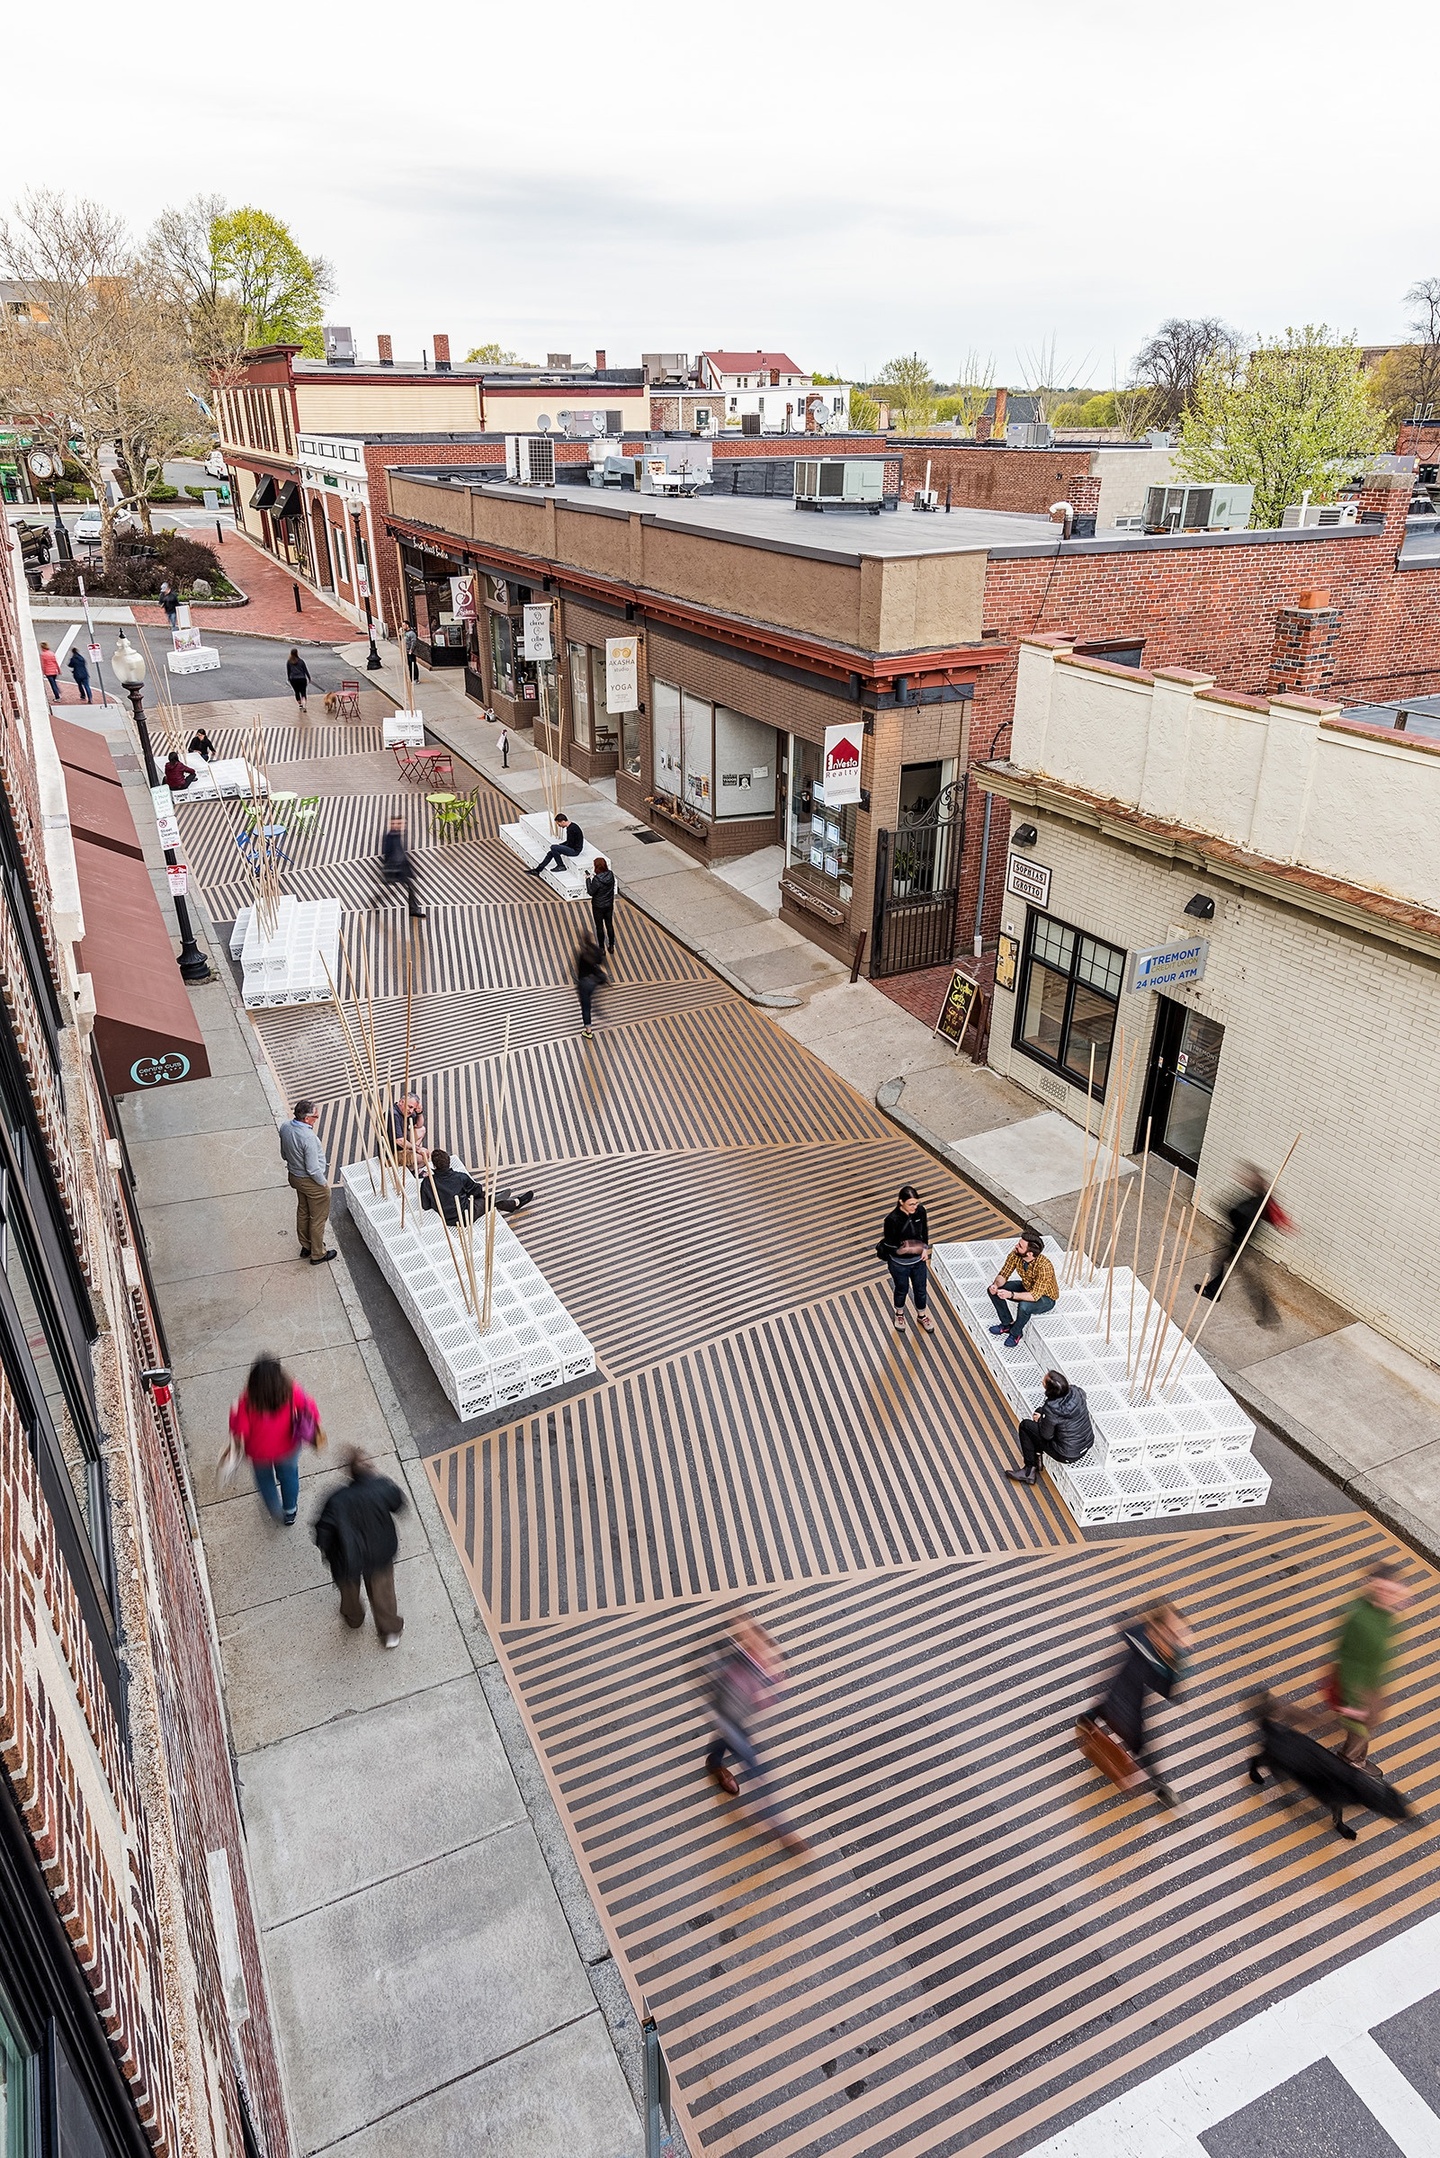 Overhead view of people walking on a pedestrian throroughfare with shops/buildings on both sides. Between the sidewalks is a walkway made of interesting black-and-tan striped boards set up in different patterns, along with block-like white-and-gray furniture pieces to sit on.